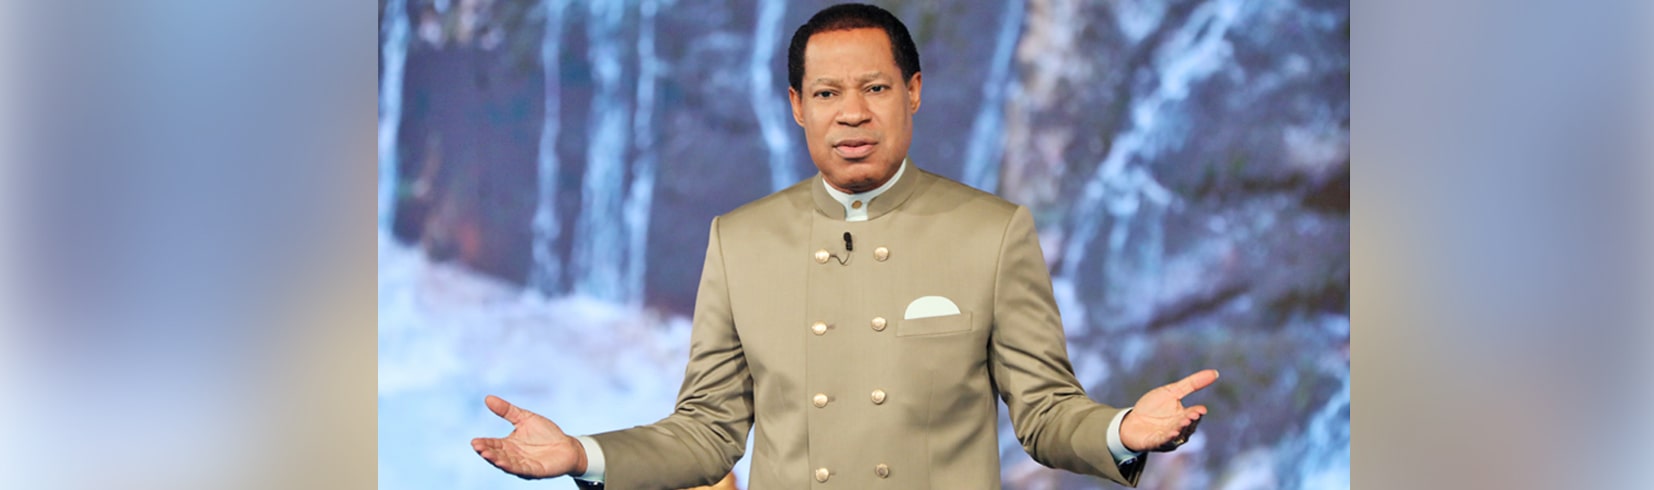 WISDOM AND RIGHTEOUSNESS – RHAPSODY OF REALITIES [WED MAR 22]